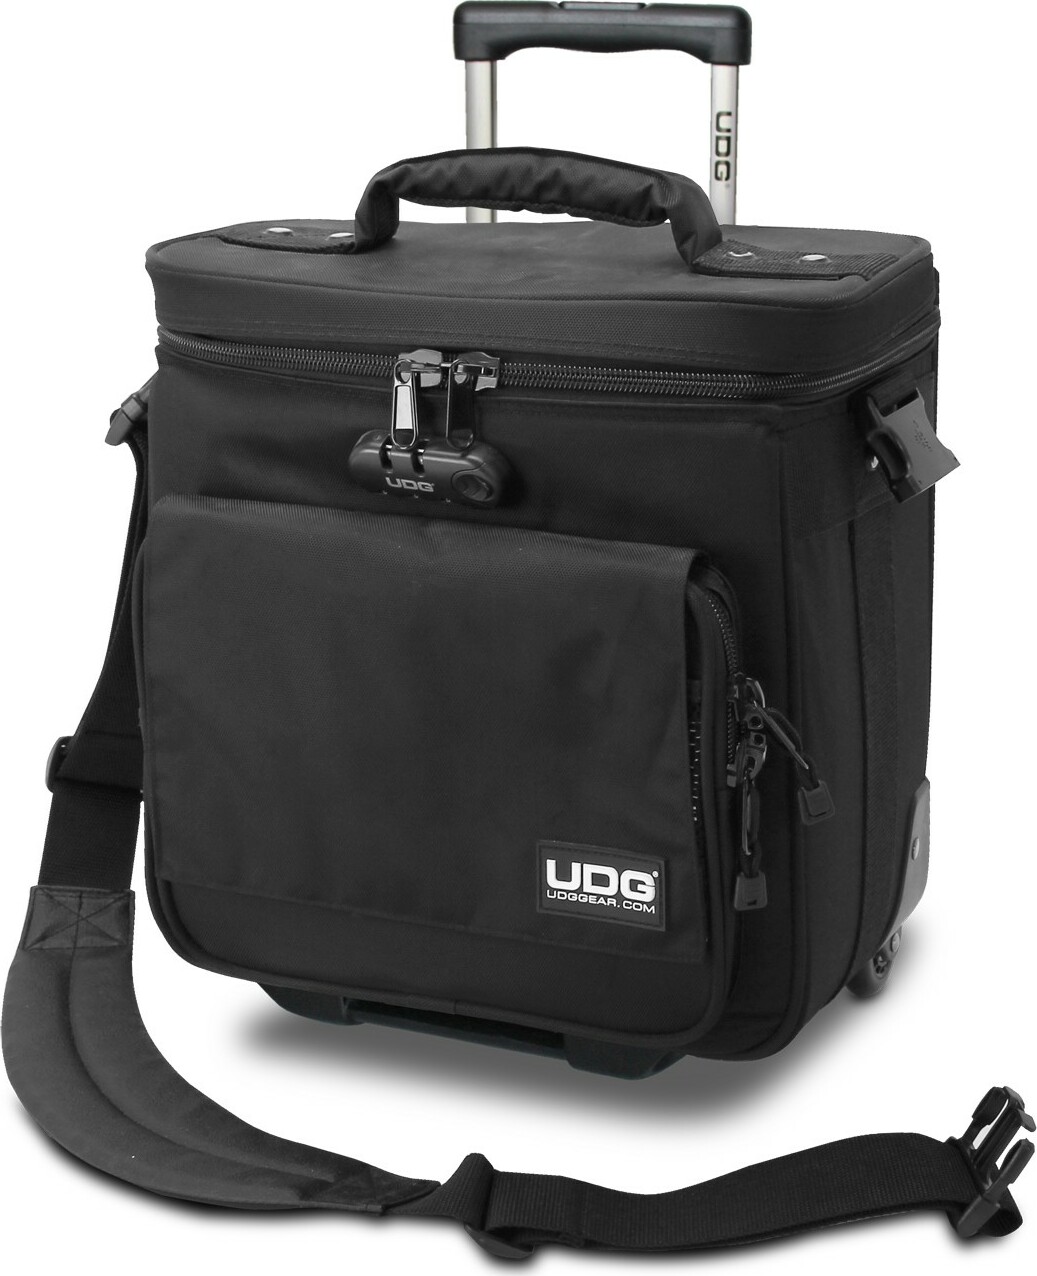 Udg Ultimate Trolley To Go Black - Sac Transport Trolley Dj - Main picture